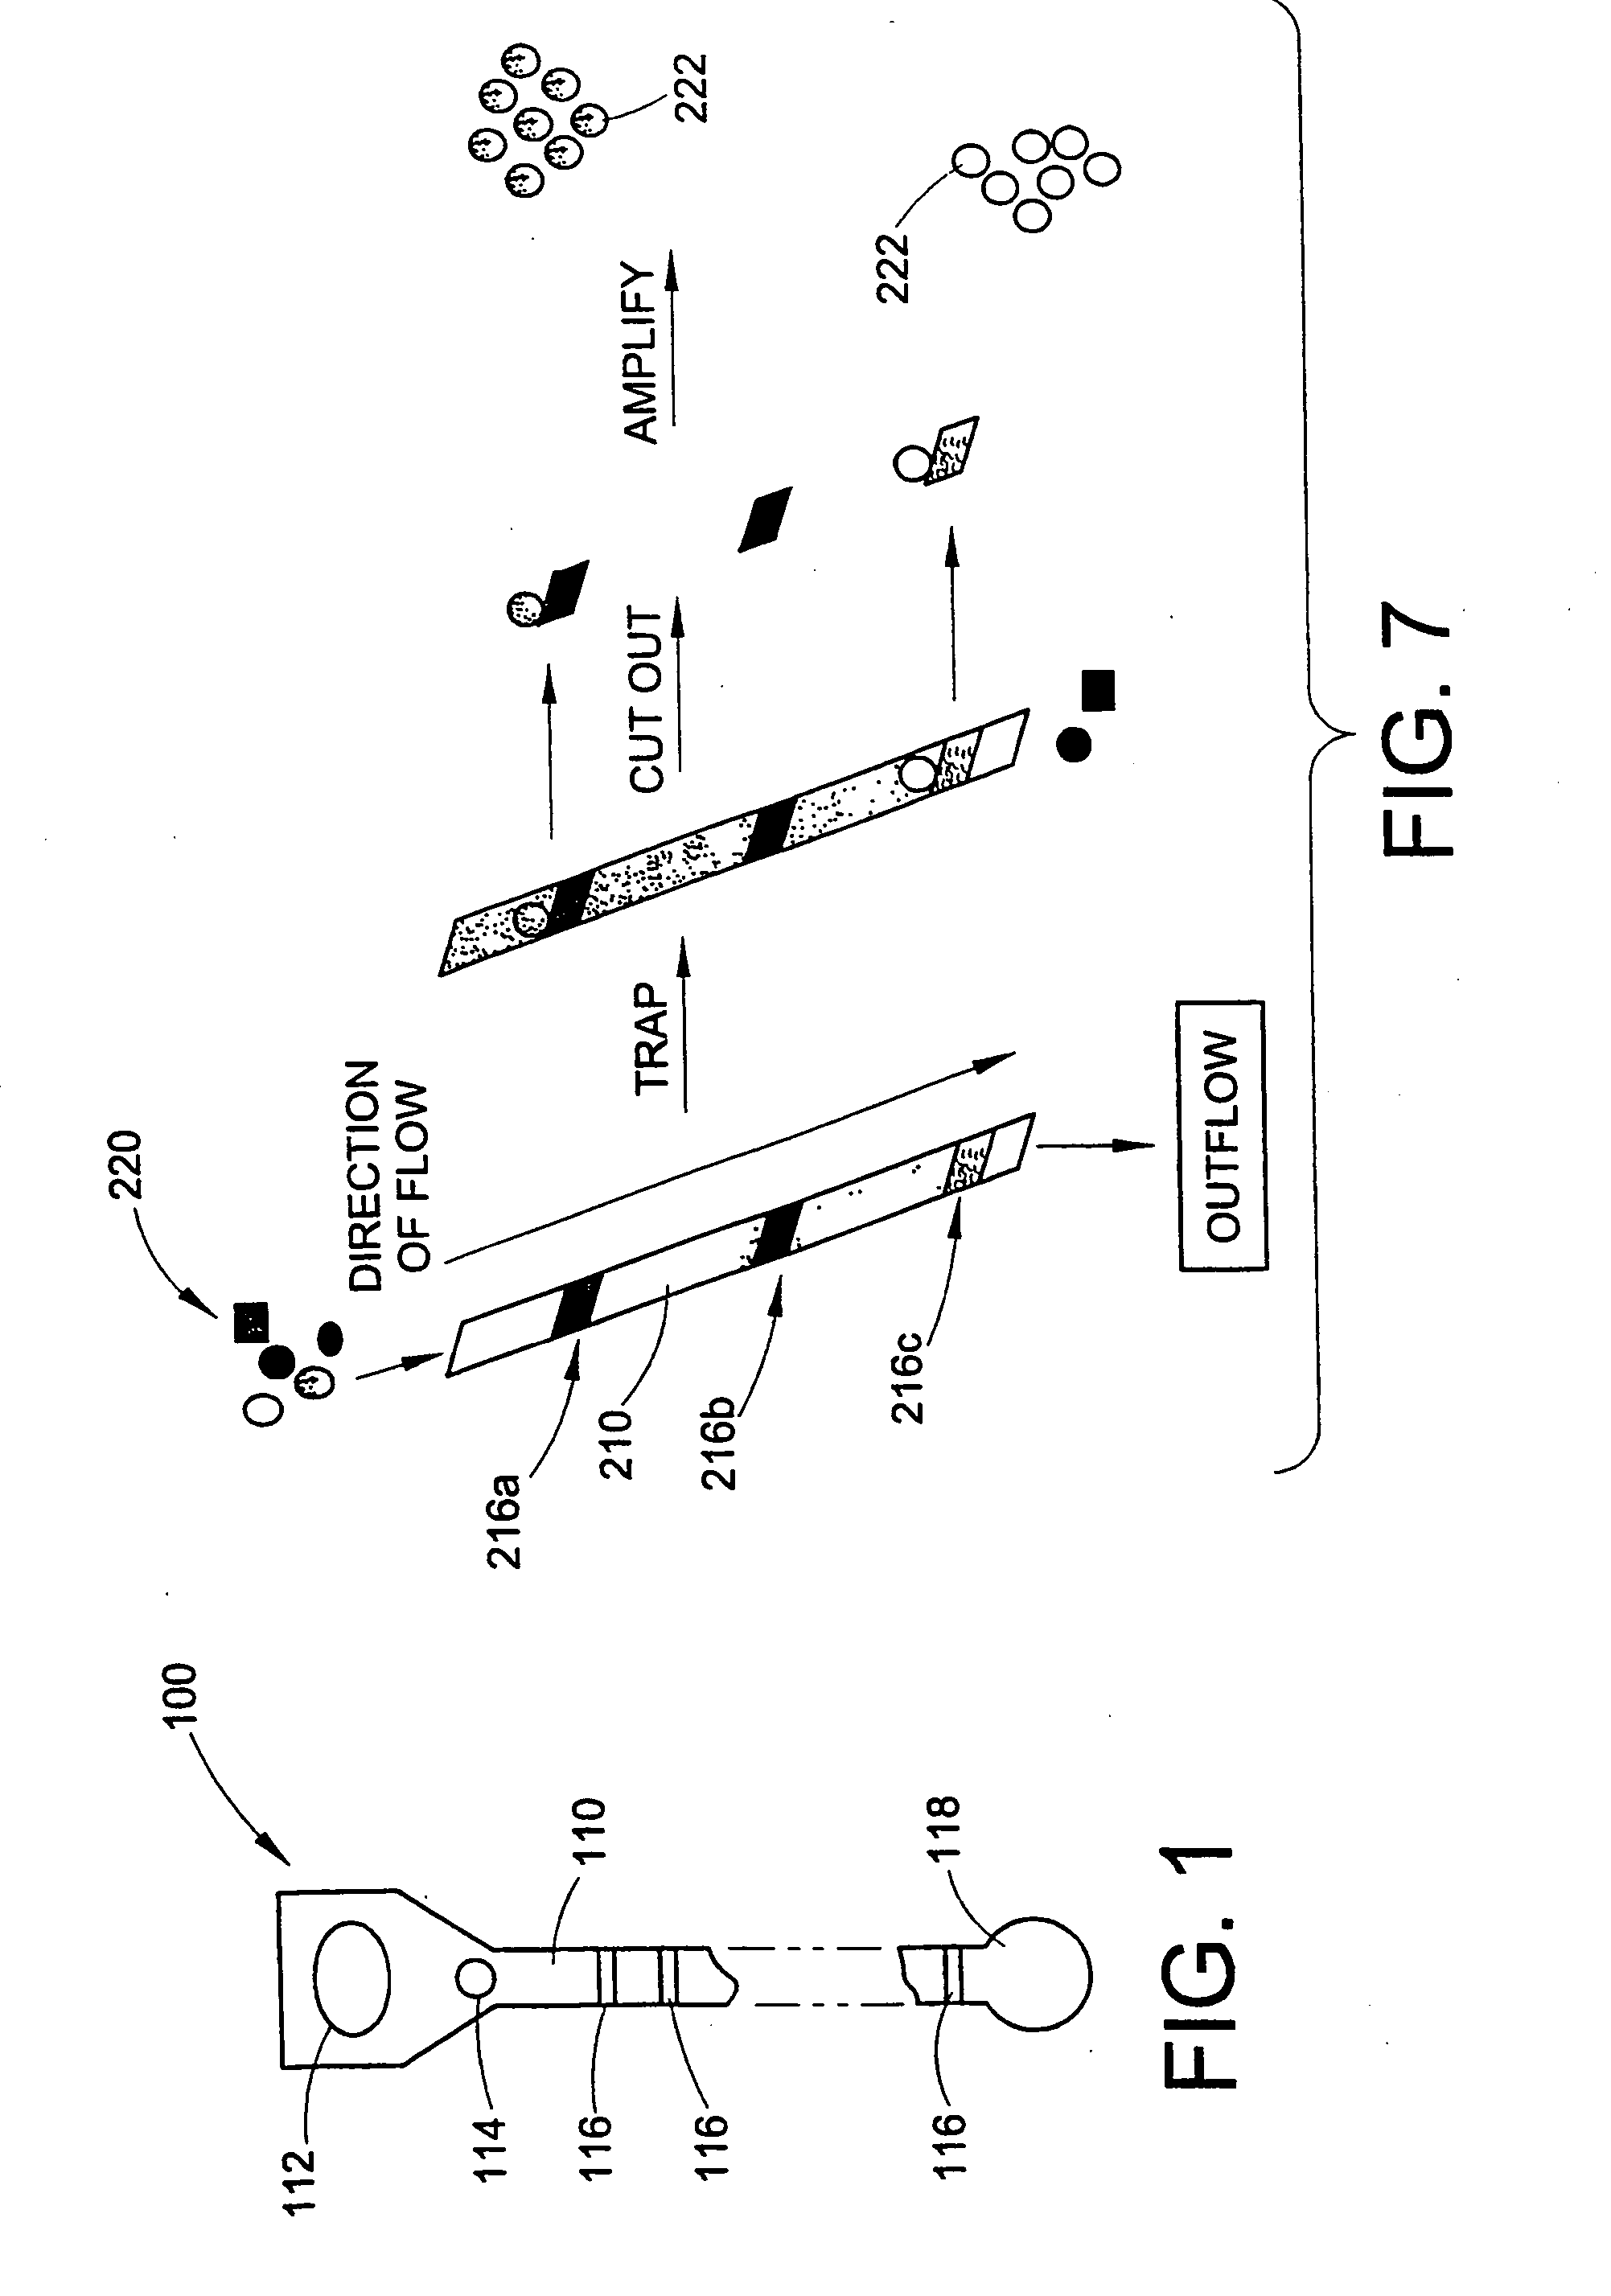 Method and apparatus for signal transduction pathway profiling